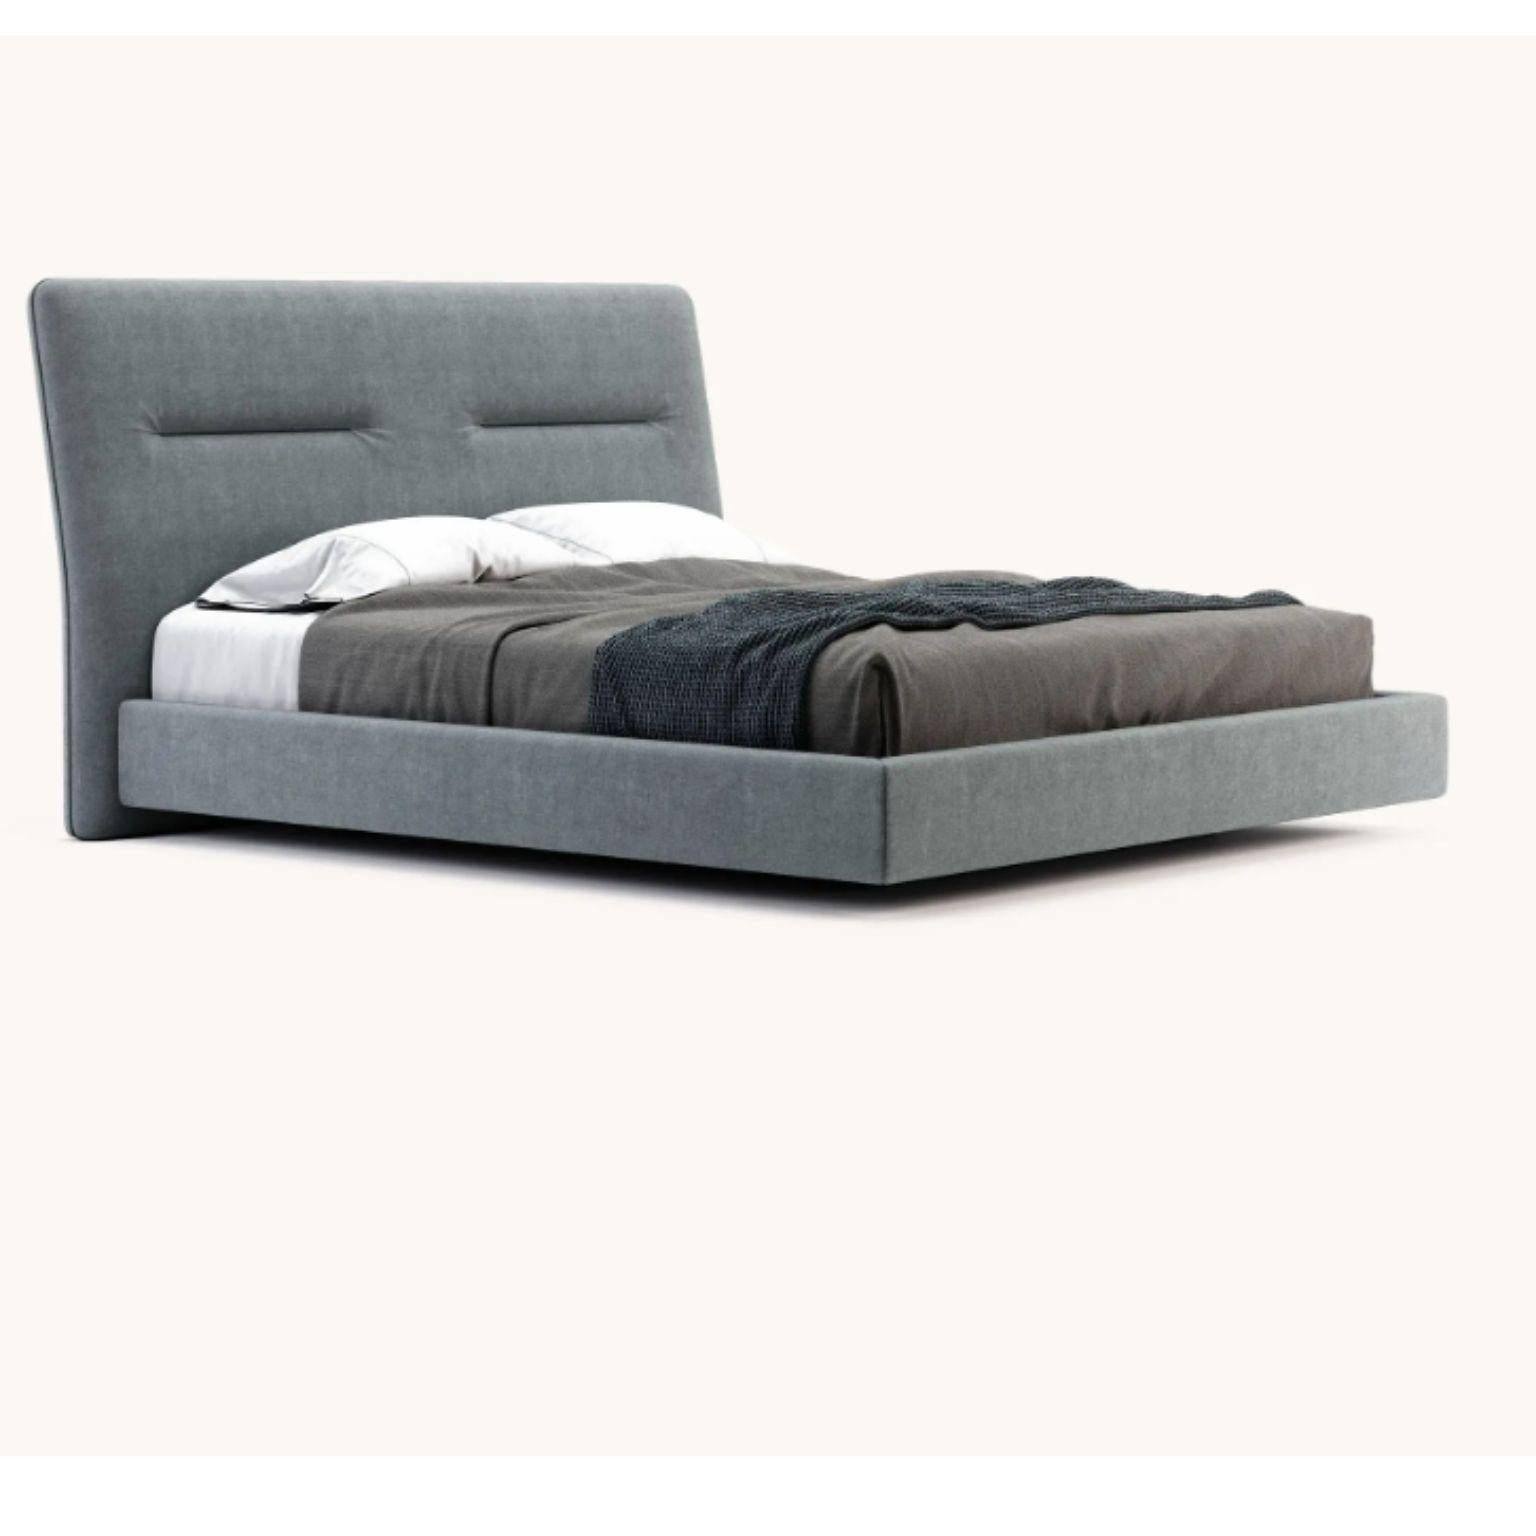 King size Helen bed by Domkapa
Dimensions: W 232 x D 233 x H 123 cm.
Materials: Microfibers (Tarn 20), fiber (Logone 851).
Also available in different materials.

Helen bed will make you feel on cloud nine with its upholstered structure and